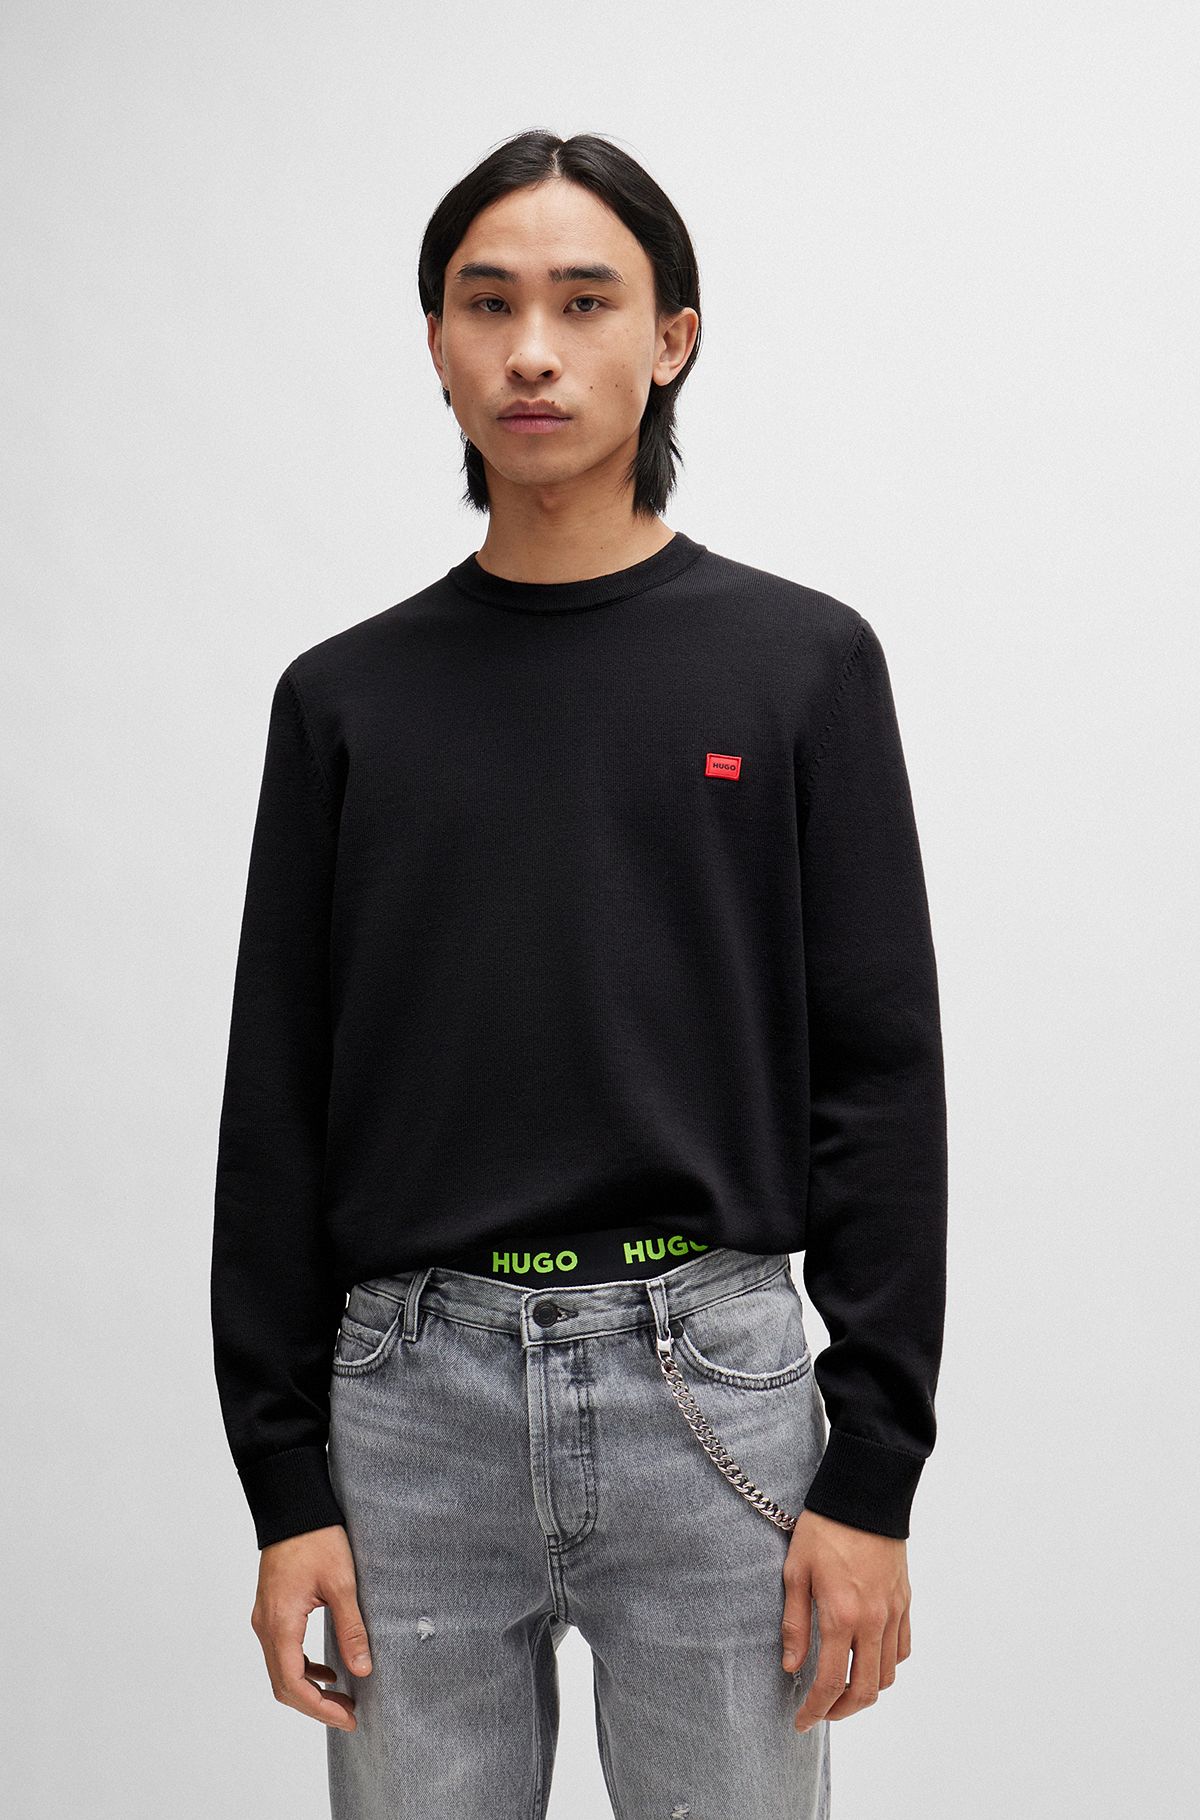 HUGO - Knitted cotton sweater with red logo label